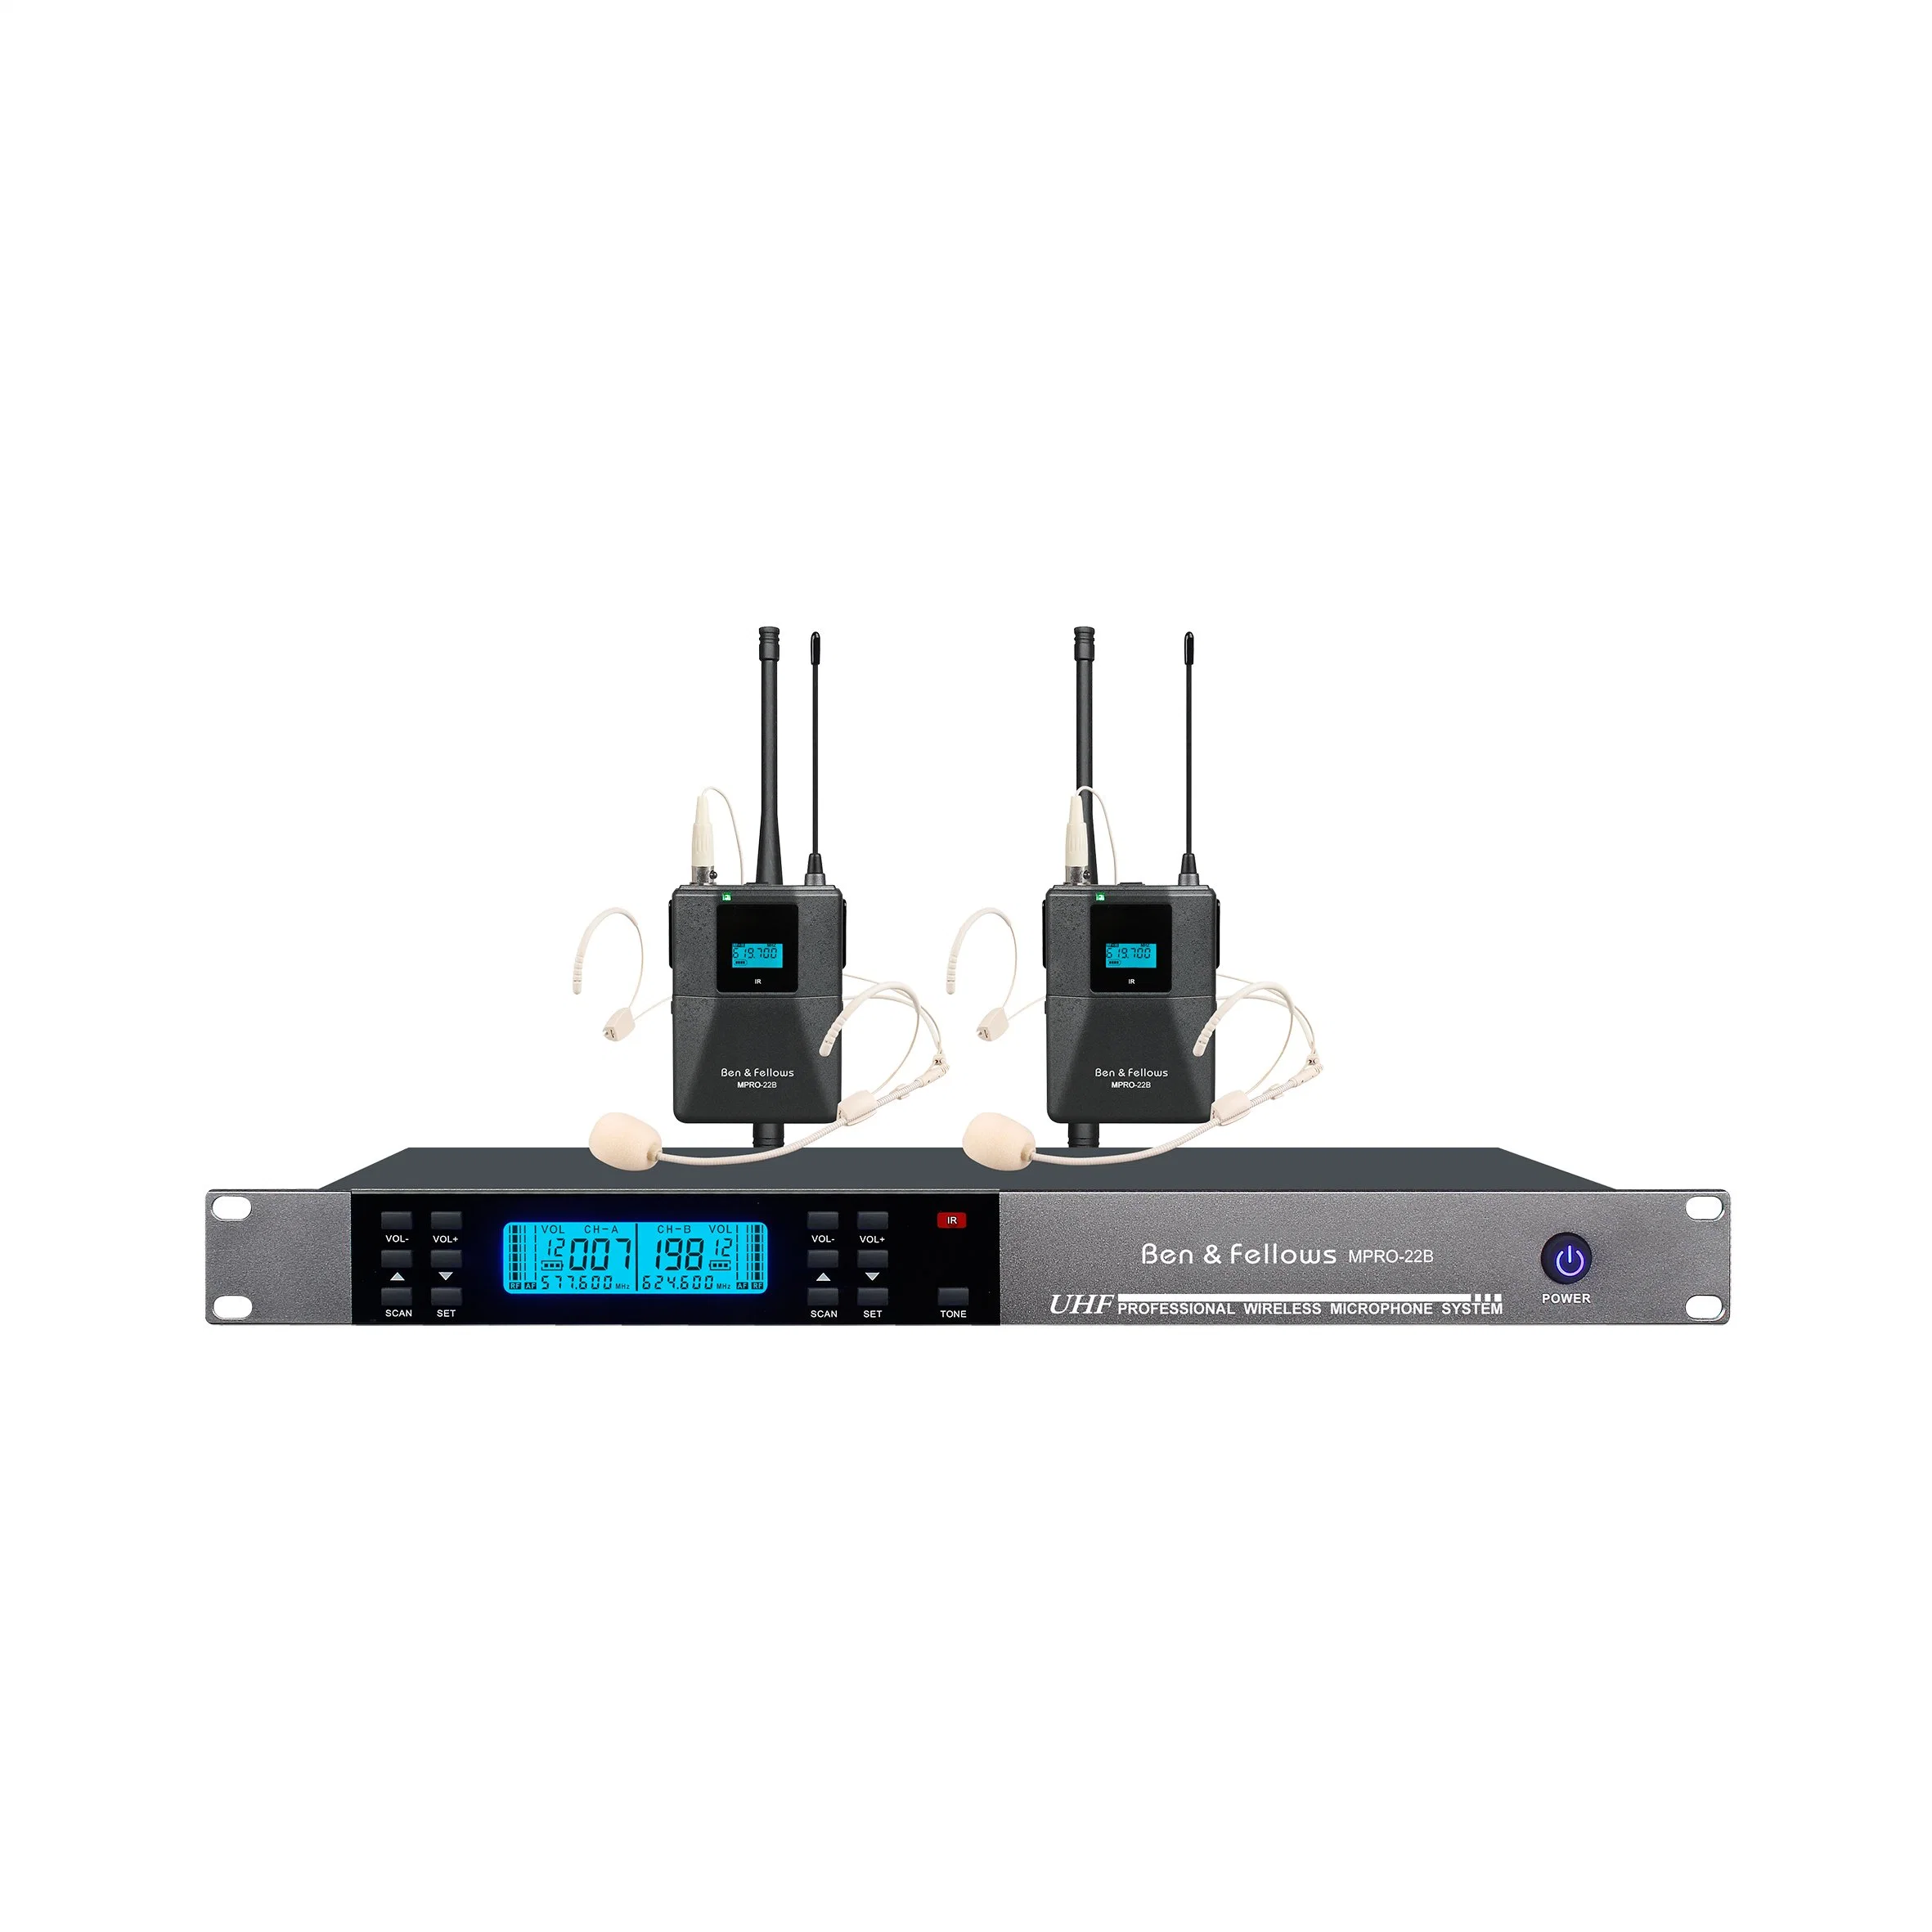 Dual Channels UHF Pll Wireless Headset Microphone with Belt-Pack Transmitter for Teaching/ Speech